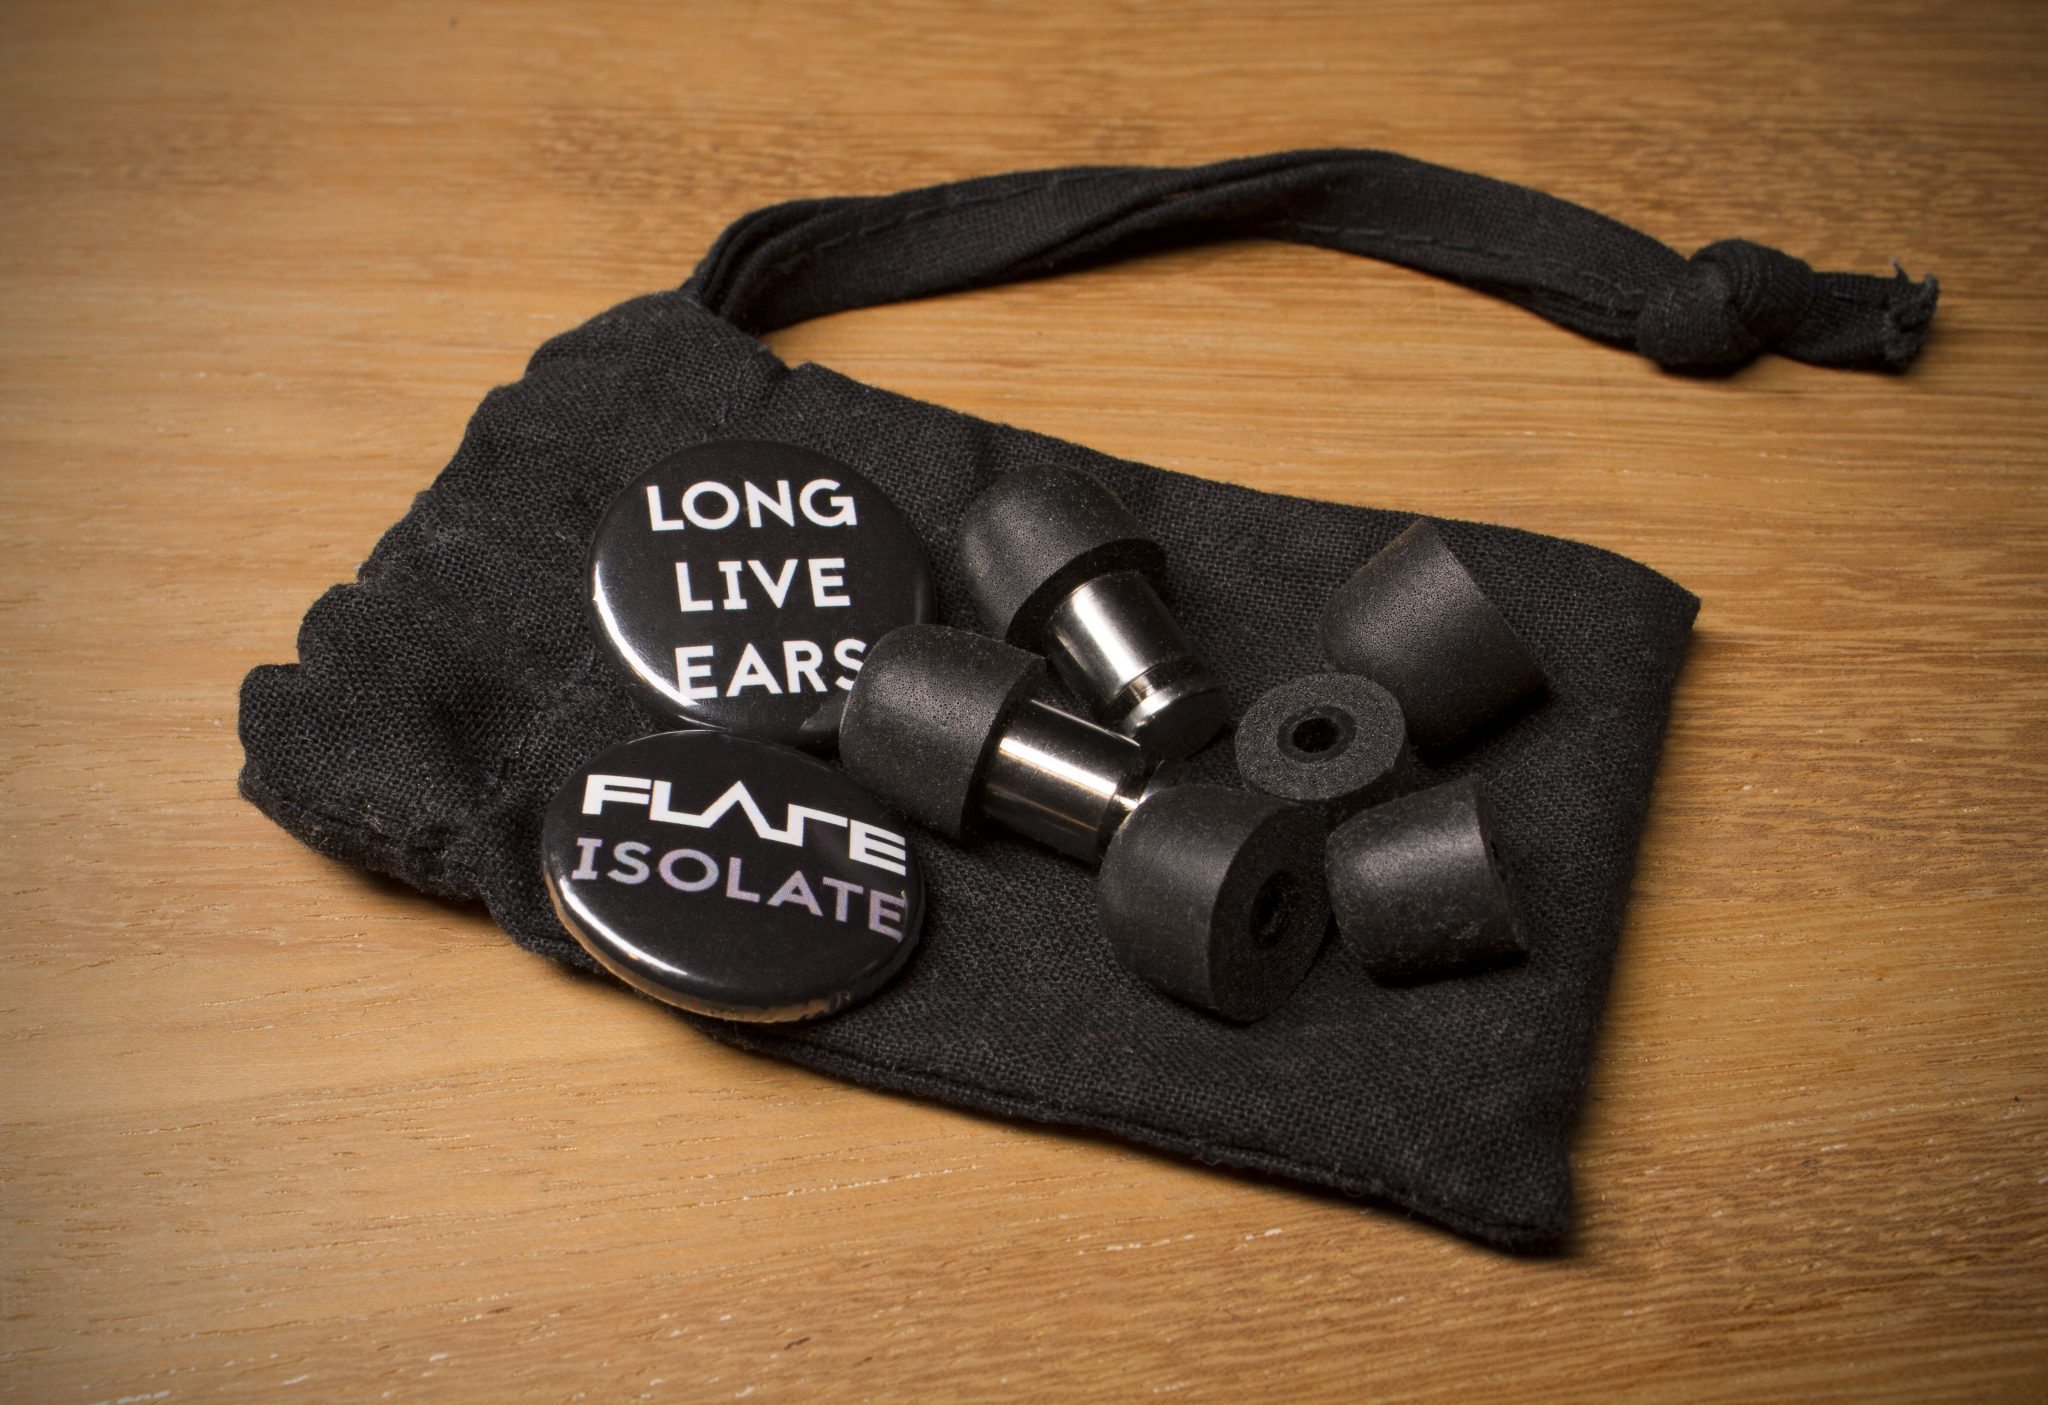 Flare Isolate ear plugs review (1)